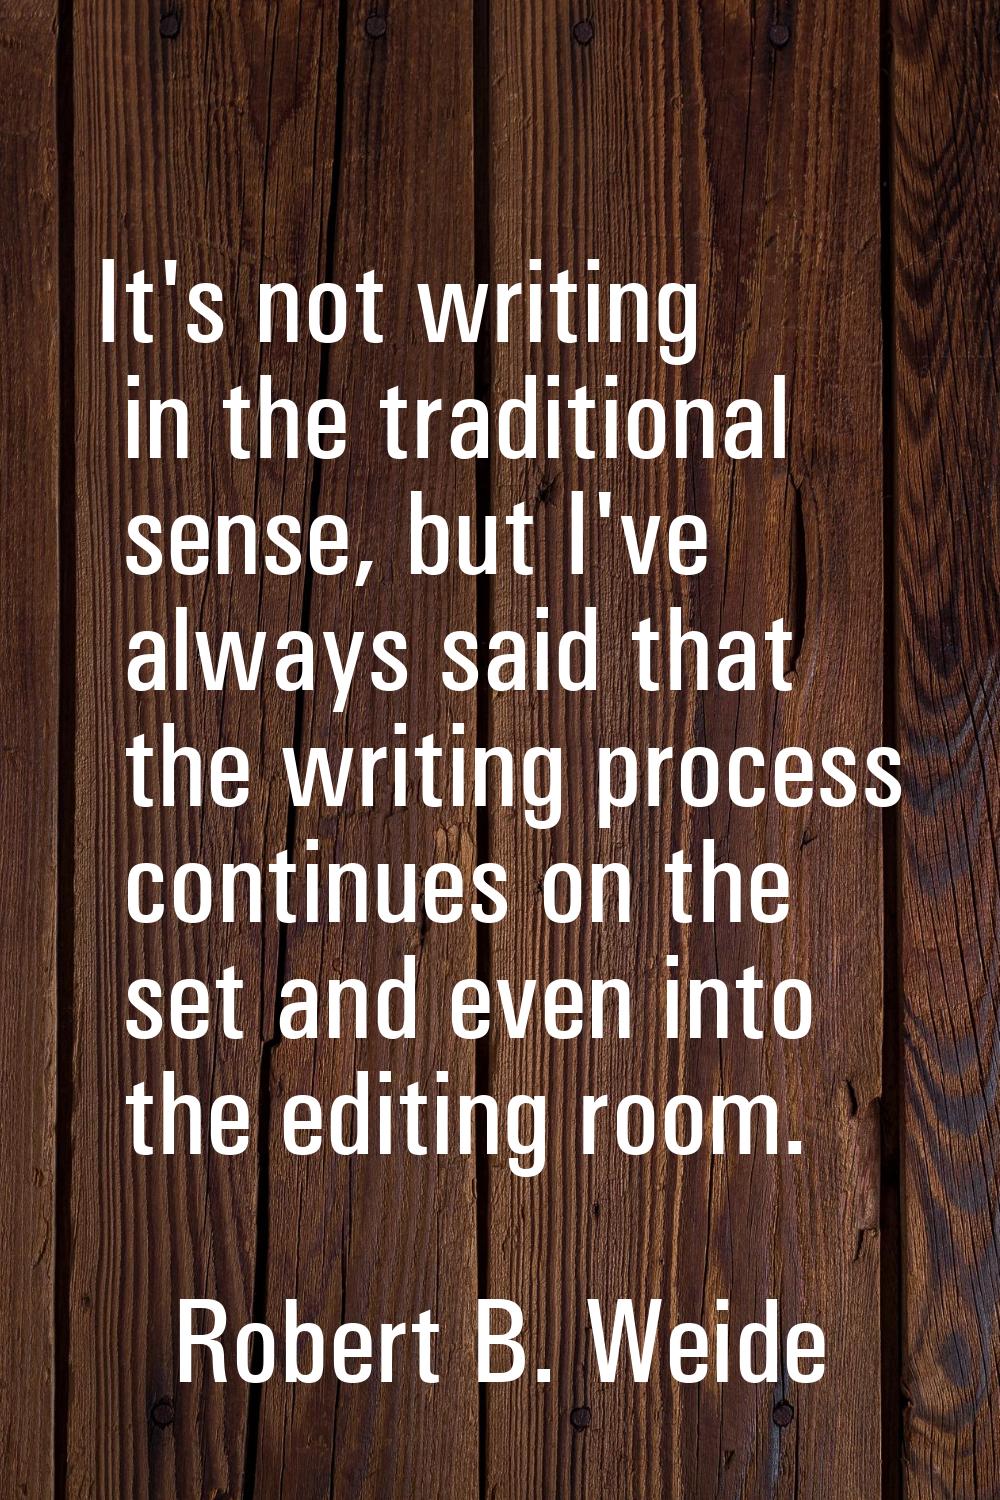 It's not writing in the traditional sense, but I've always said that the writing process continues 